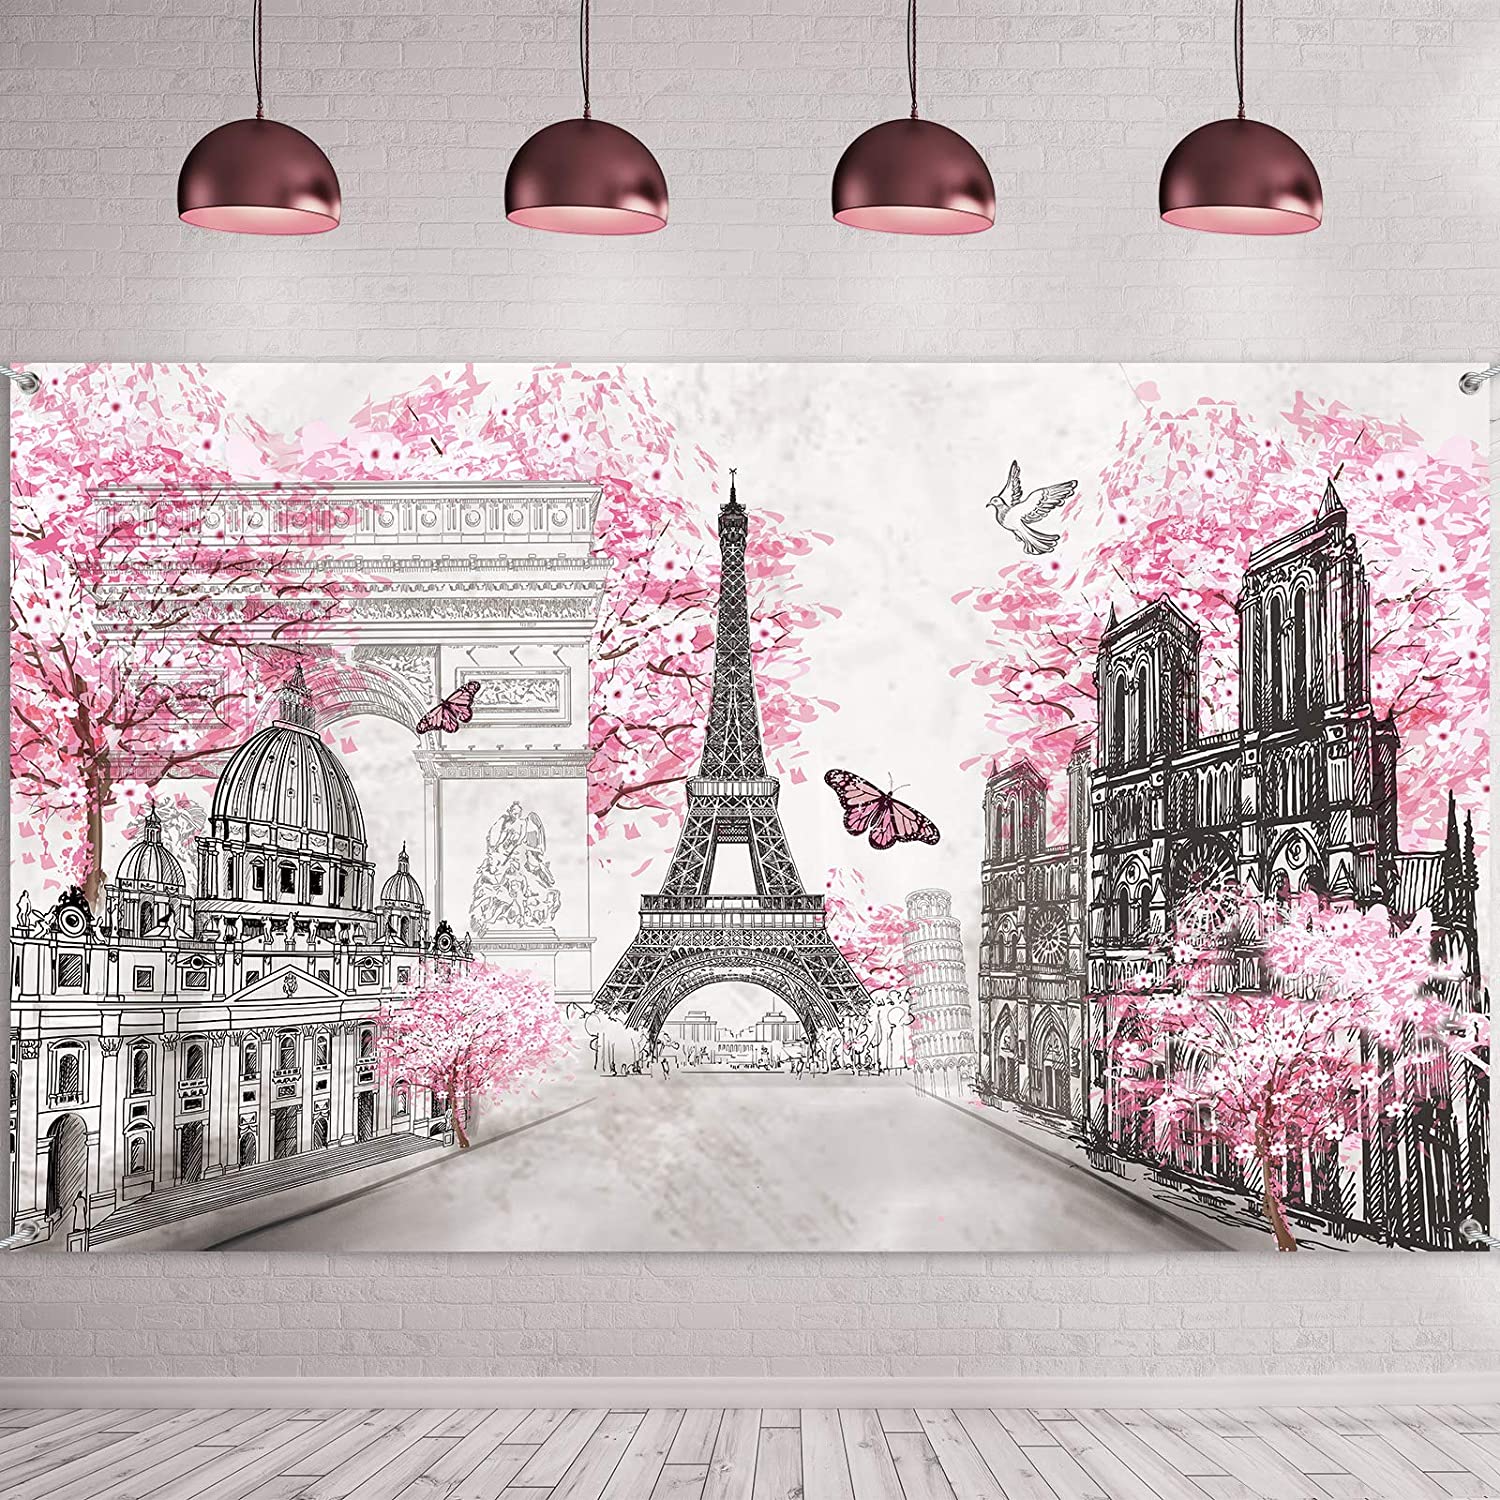 Sumind Fabric Banner Eiffel Tower Paris Decor For Girl’s Bedroom